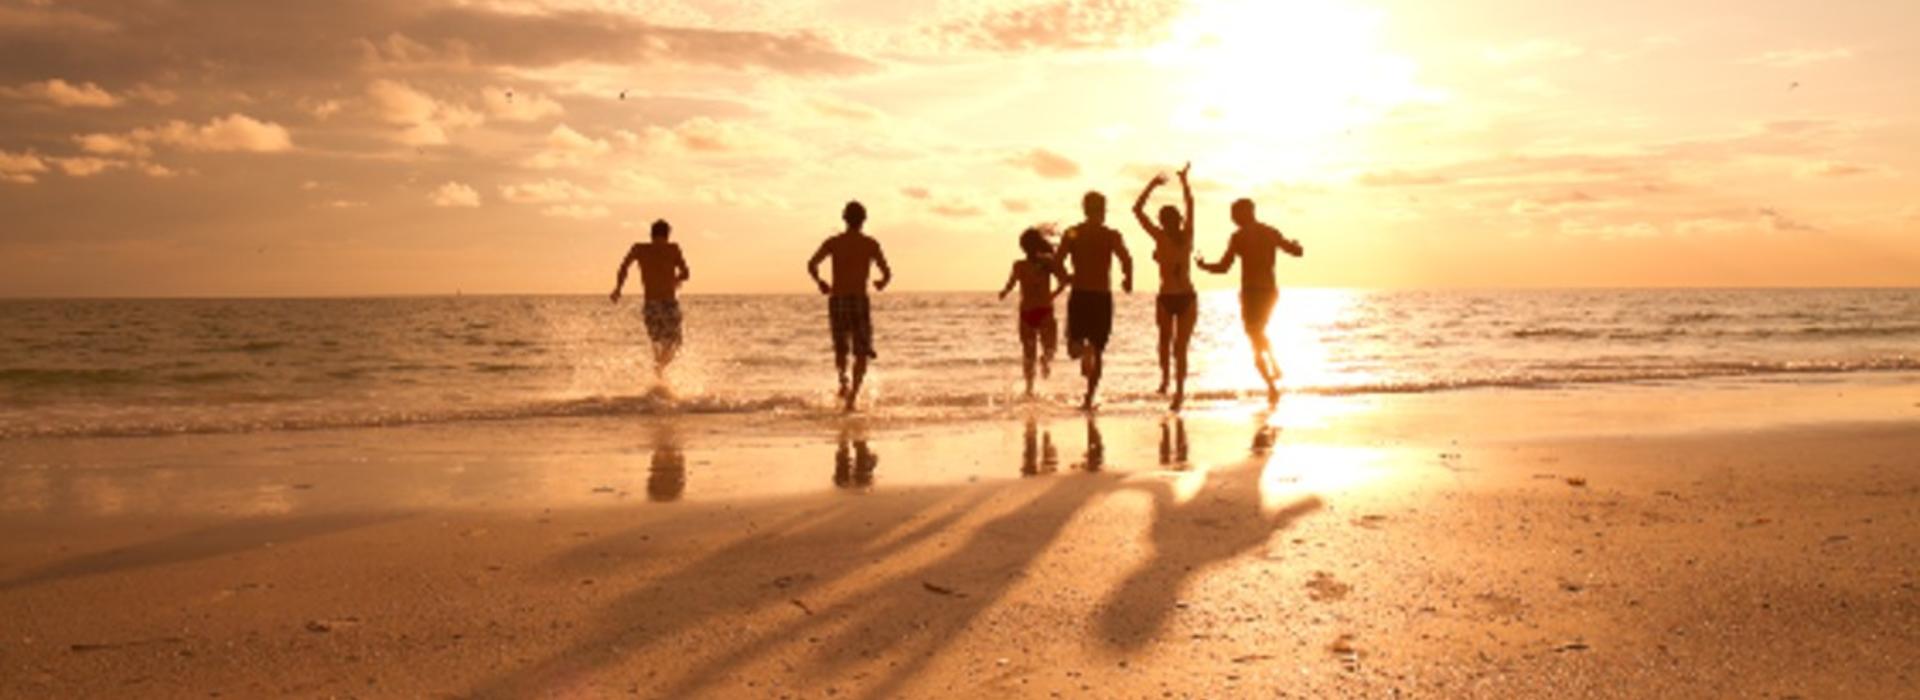 A shot of a group of people in swimwear running toward water on a beach while the sun sets in the background.